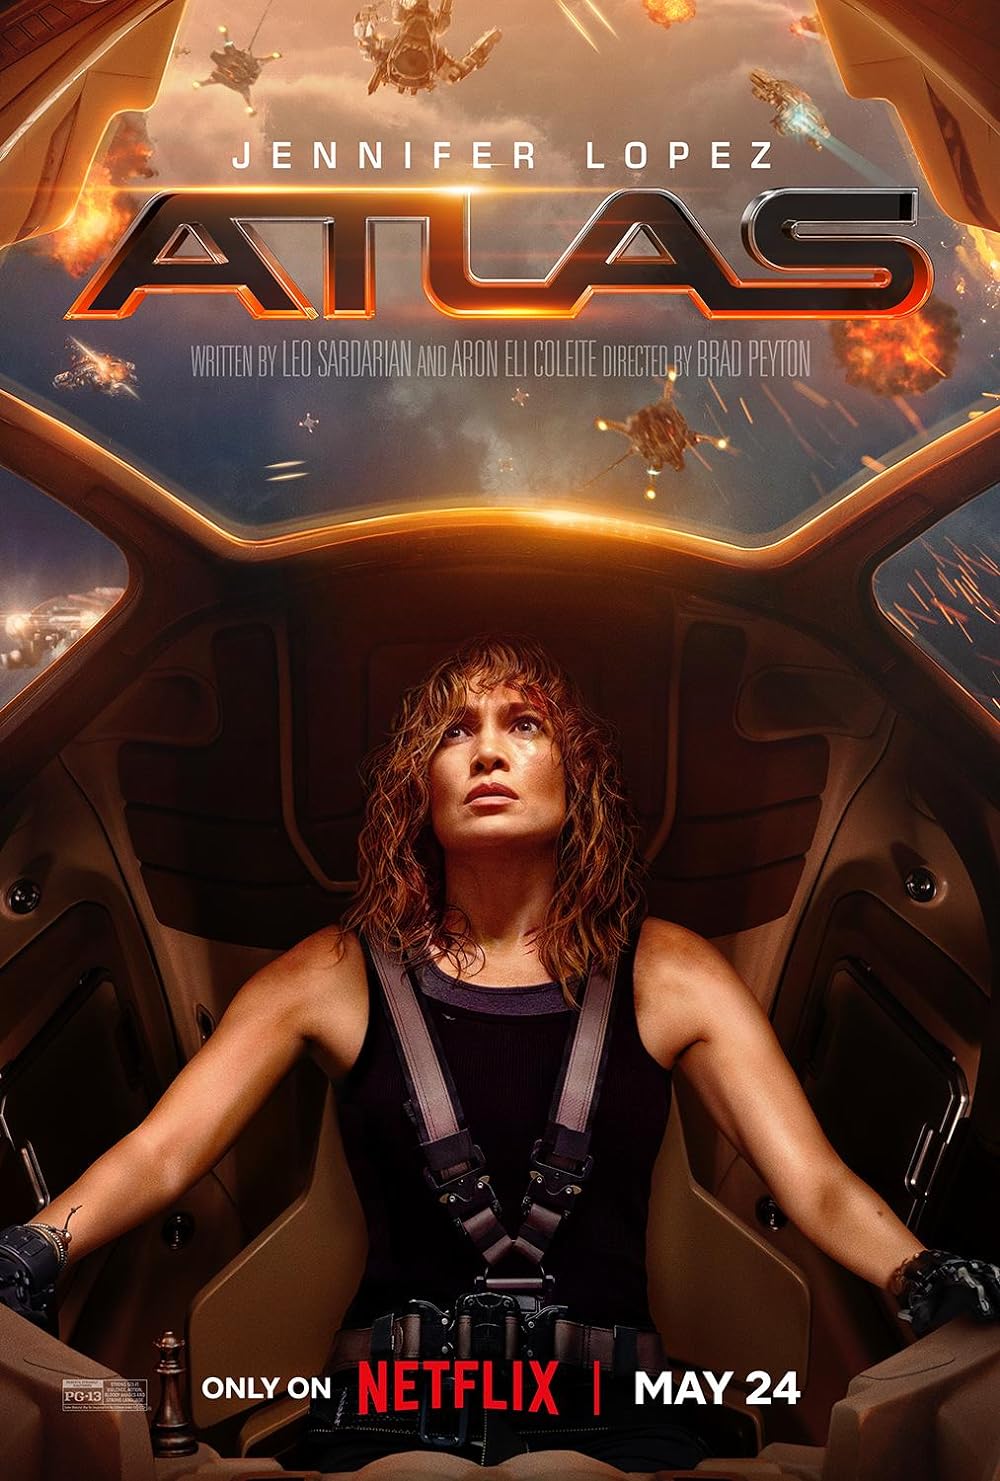 Atlas (Netflix) – May 24Atlas is a highly anticipated sci-fi thriller starring Jennifer Lopez as Atlas Shepherd, a brilliant data analyst with a deep distrust of artificial intelligence. In a future where AI soldiers are common, a rogue AI decides that ending humanity is the only way to achieve lasting peace. Atlas must partner with what she fears most to save humanity. Directed by Brad Peyton, the film also features Simu Liu, Sterling K. Brown, Mark Strong, and Lana Parrilla.